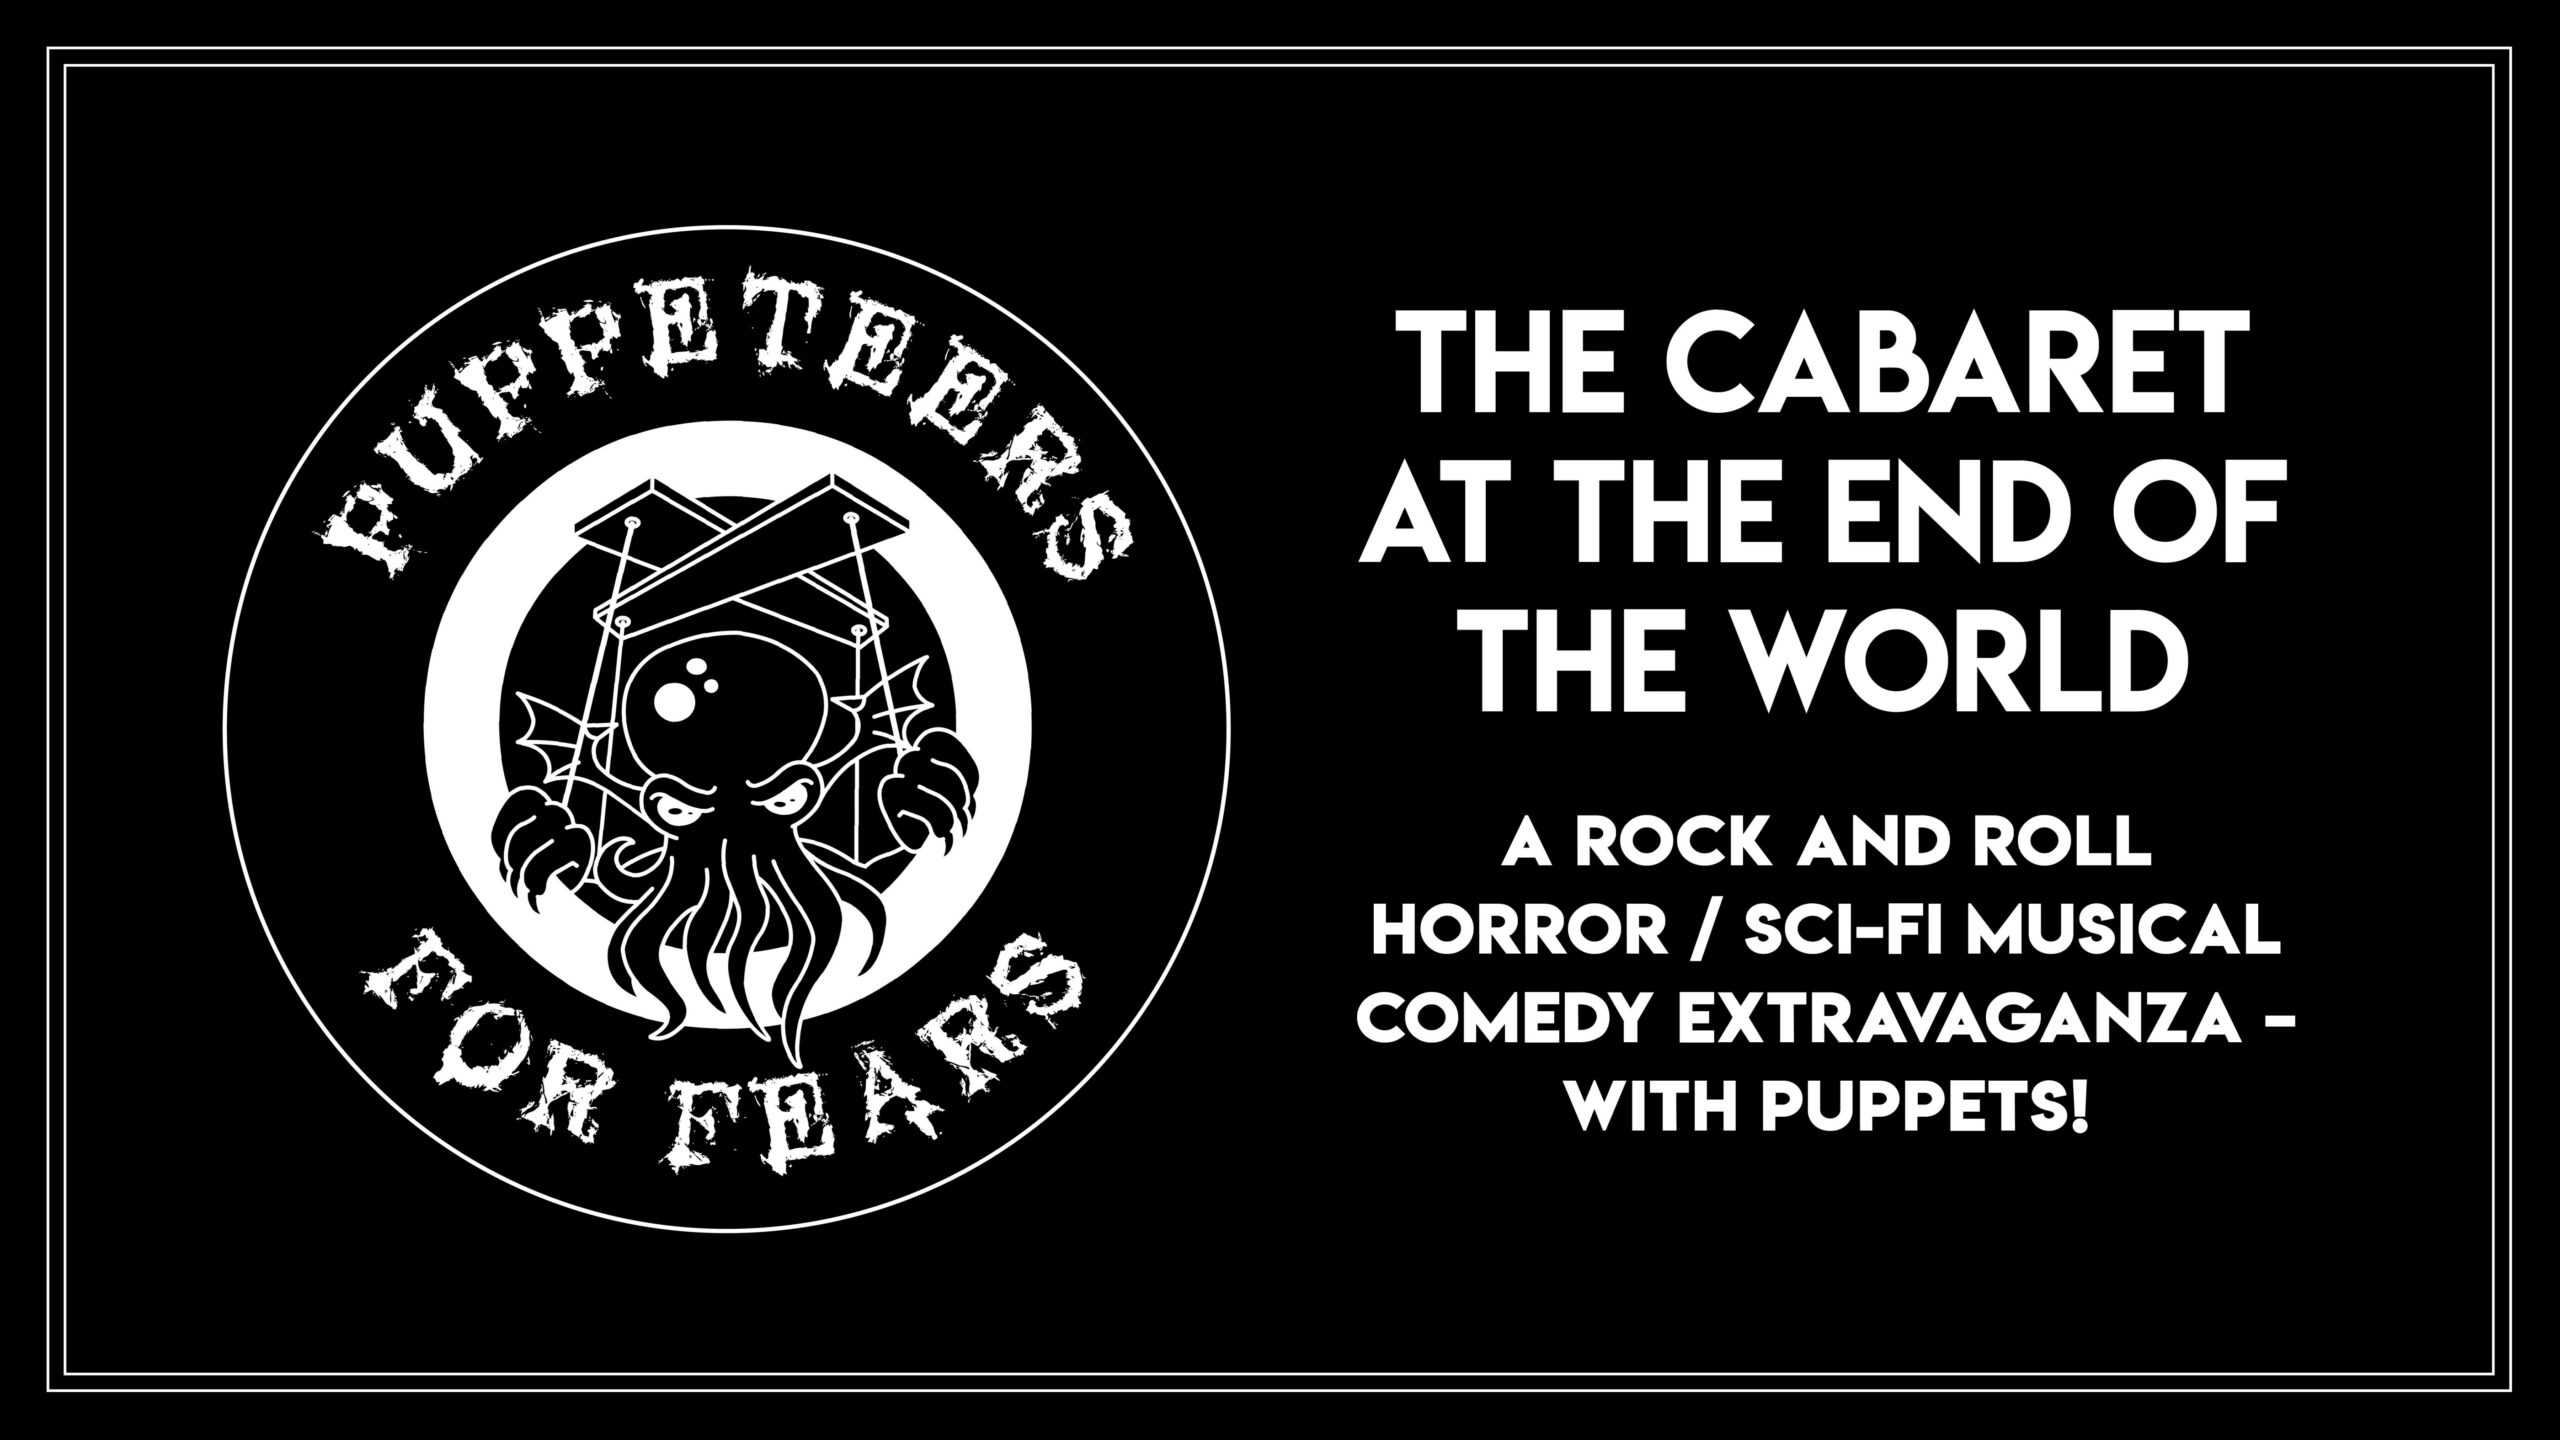 Puppeteers for Fears